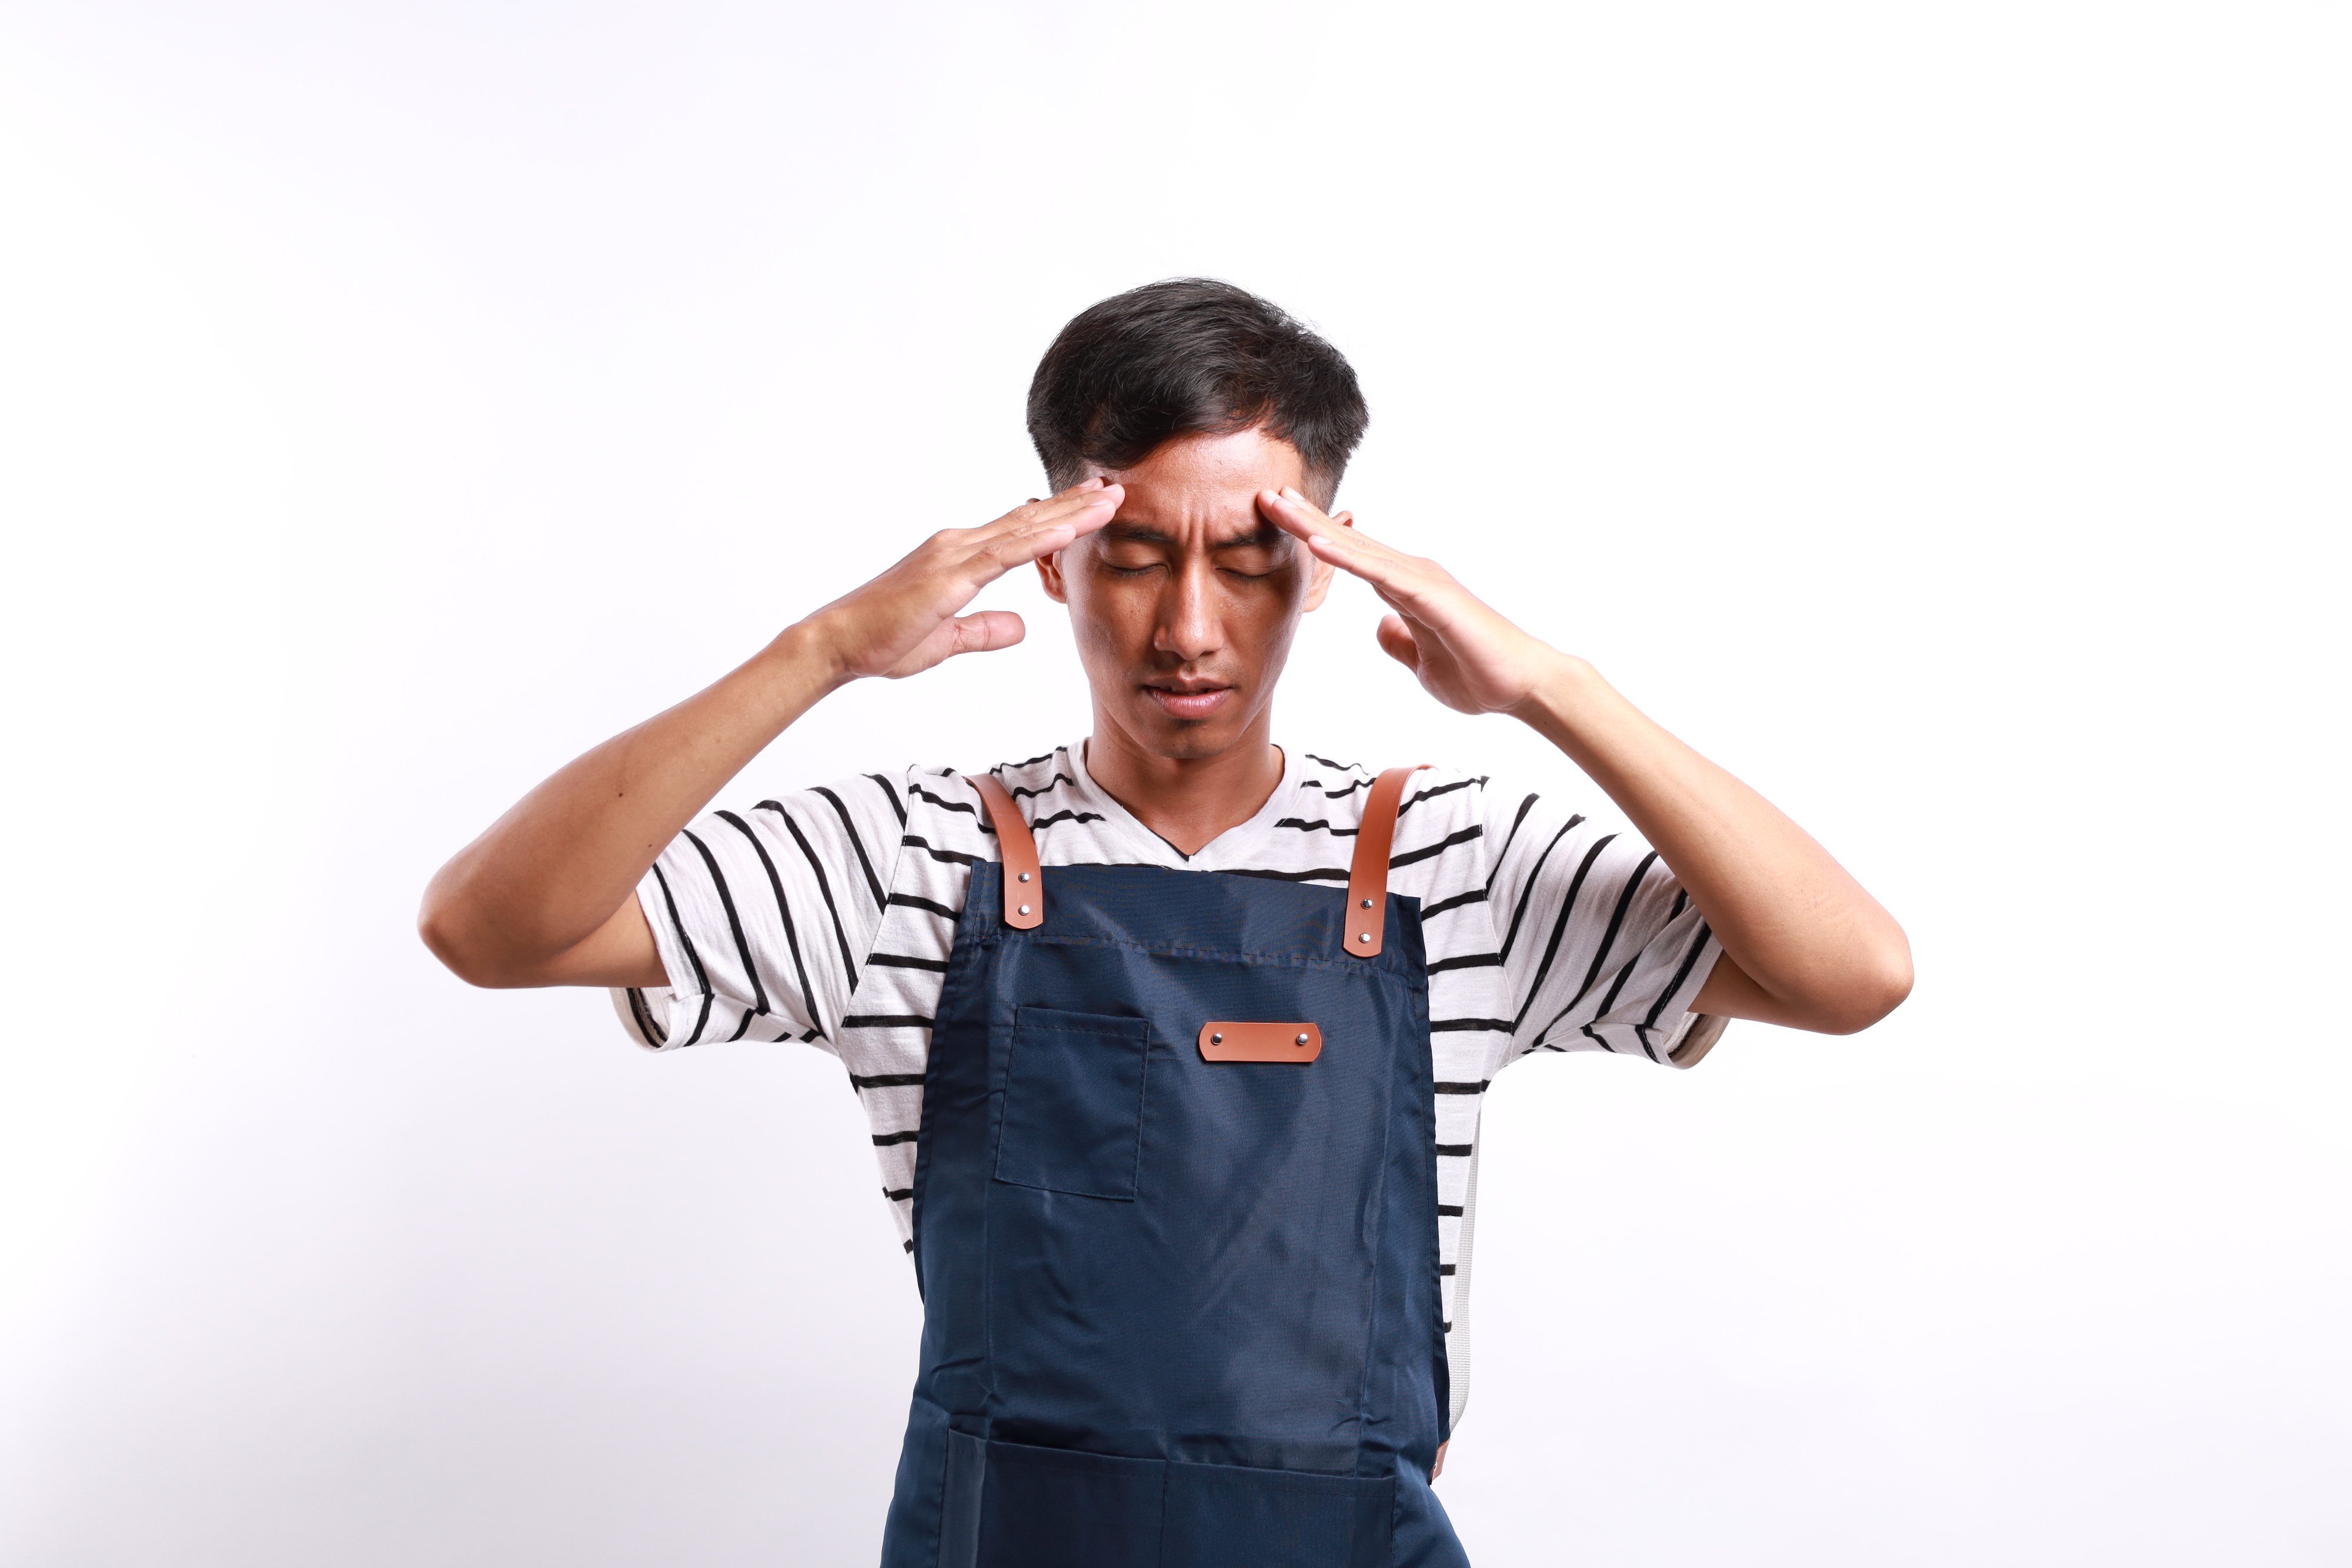 A person in a striped shirt and apron has their eyes closed, raising their hands with fingers touching their temples, appearing to be in deep thought or concentration